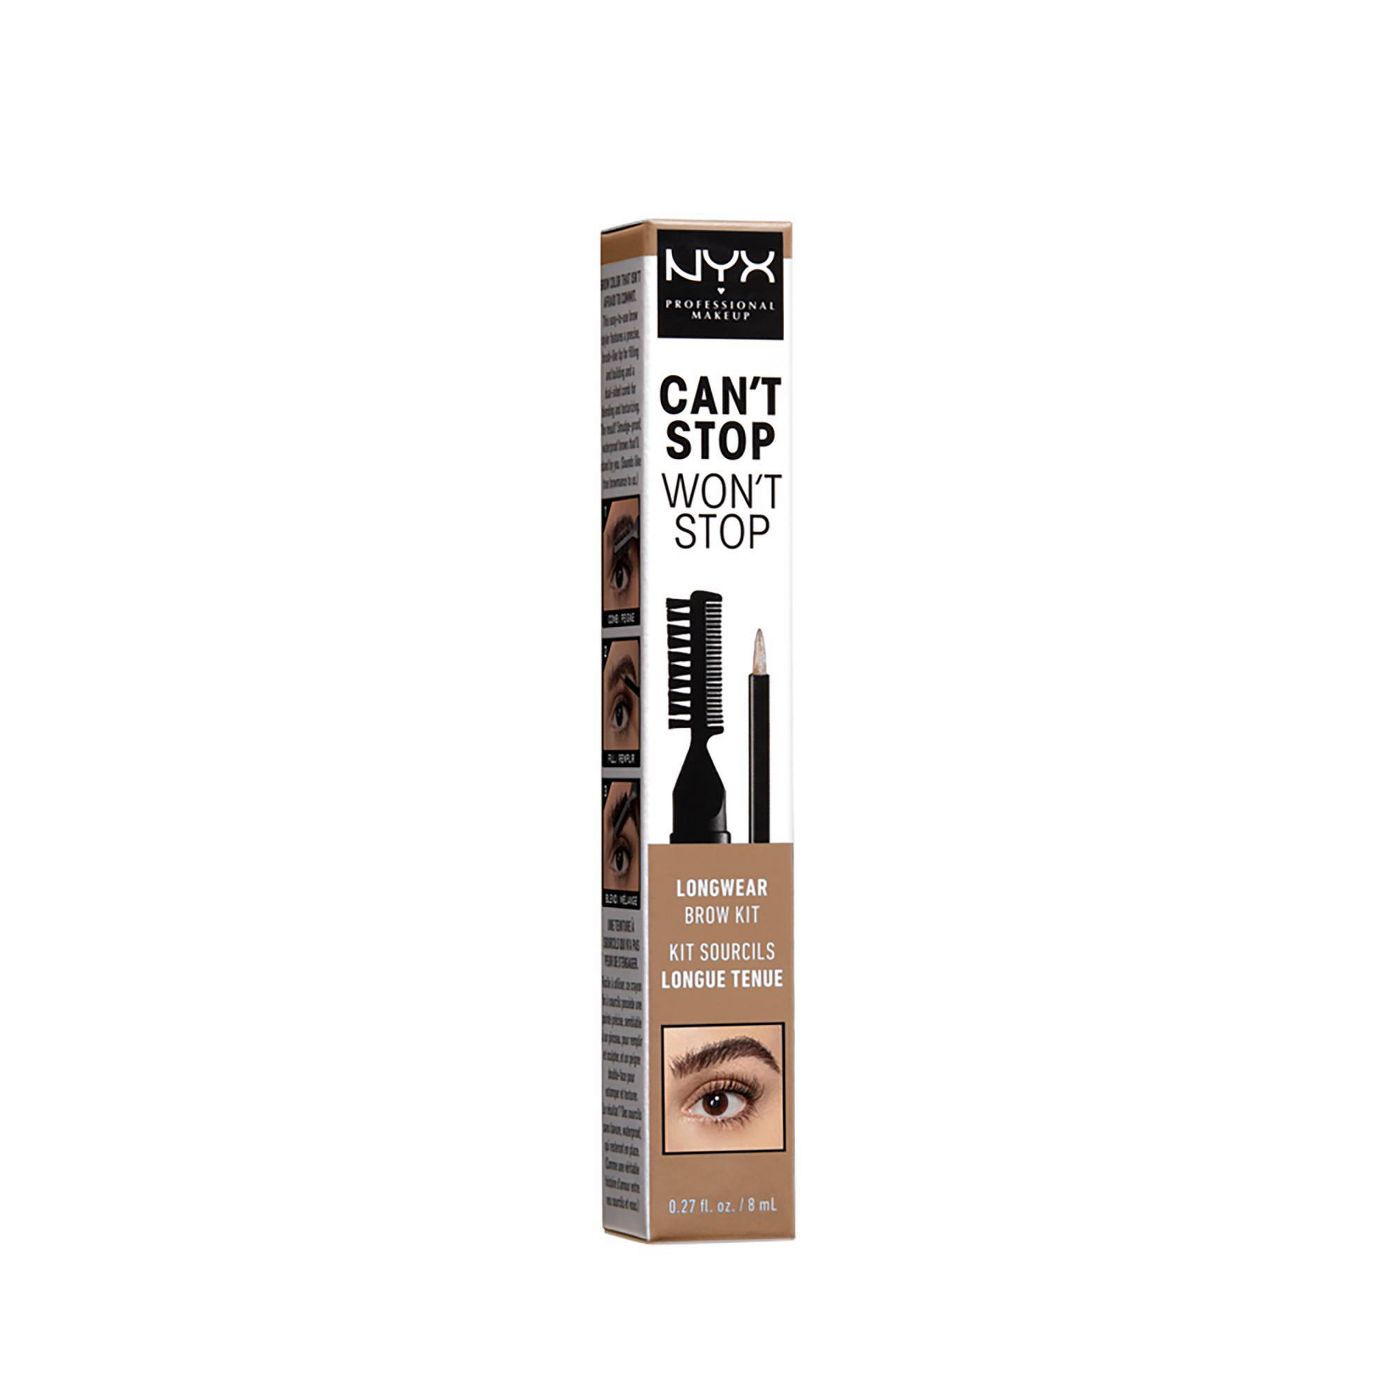 Can't Stop Won't Stop Longwear Brow Ink Kit (Taupe)- 0.27 fl oz